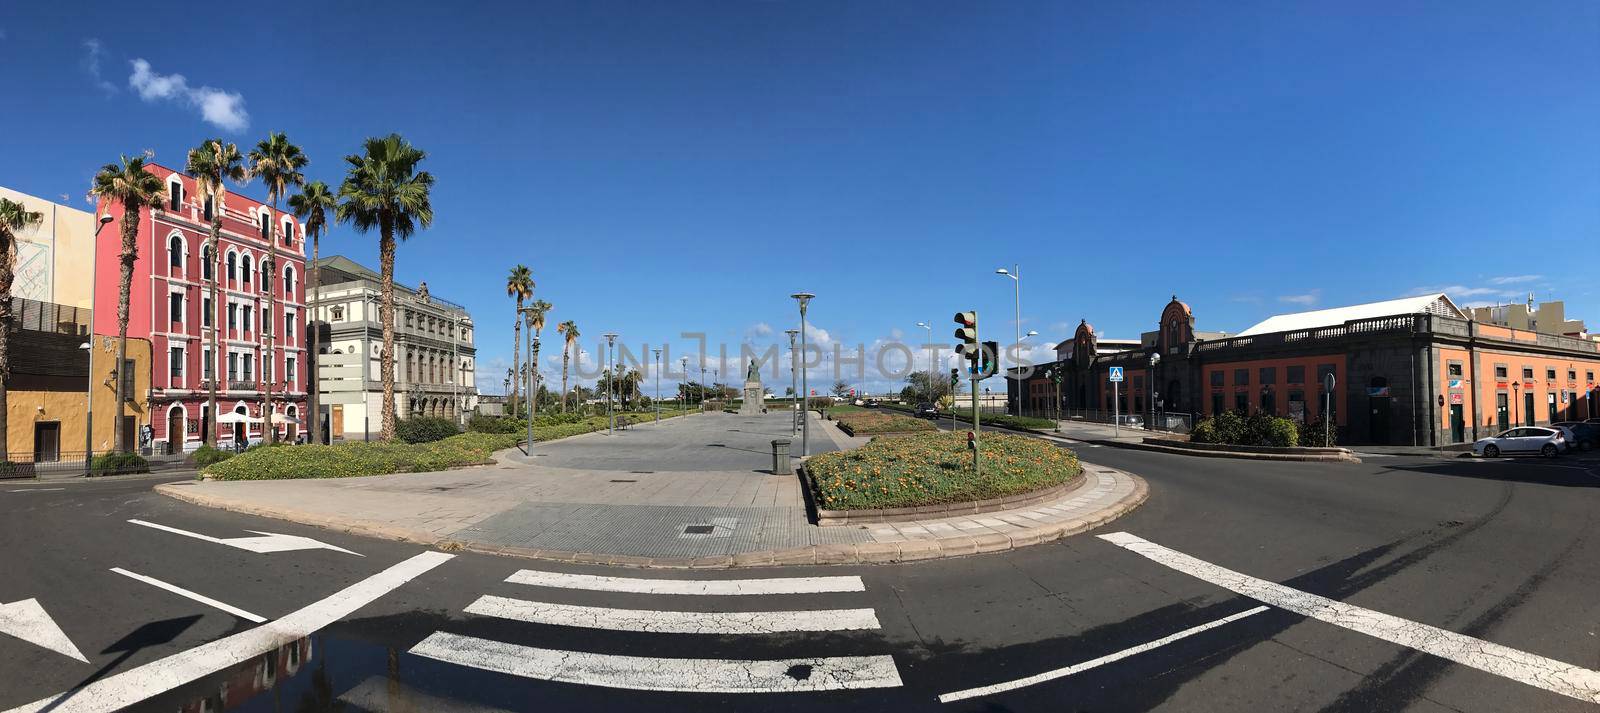 Panorama from a square in Las Palmas by traveltelly